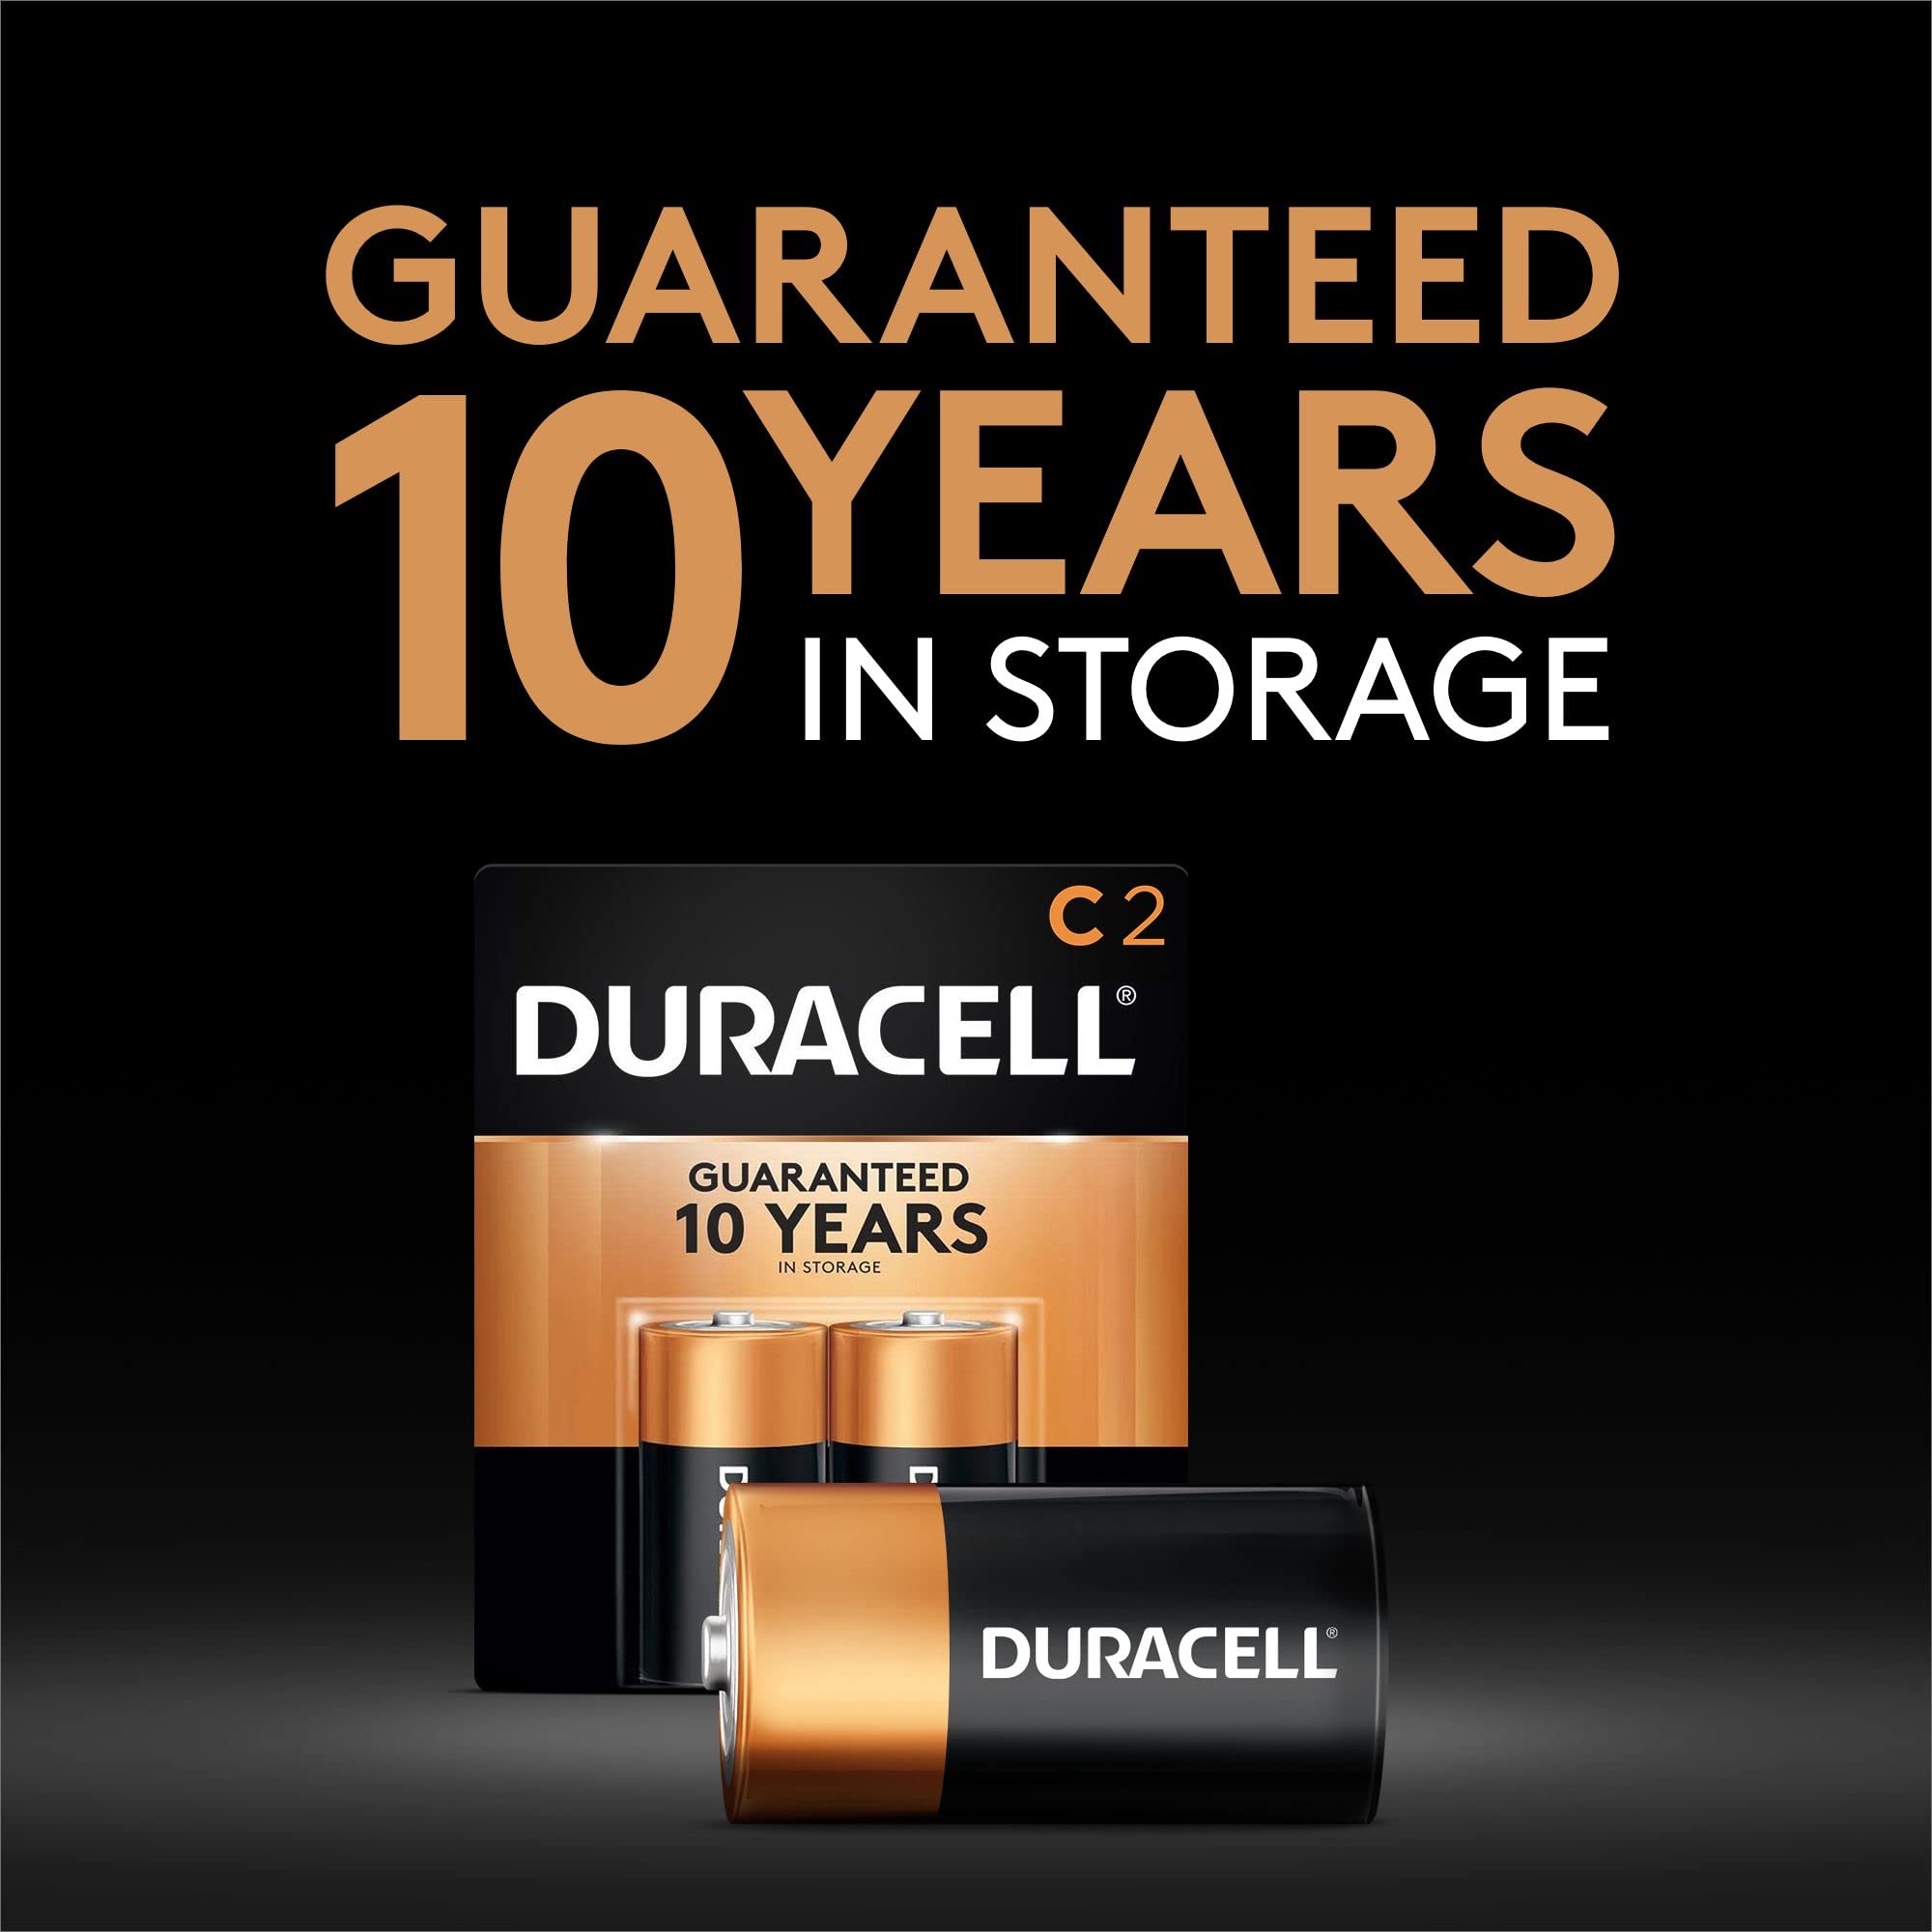 DURACELL Coppertop 1.5V Size C Alkaline Battery, (Pack of 4) - image 3 of 5